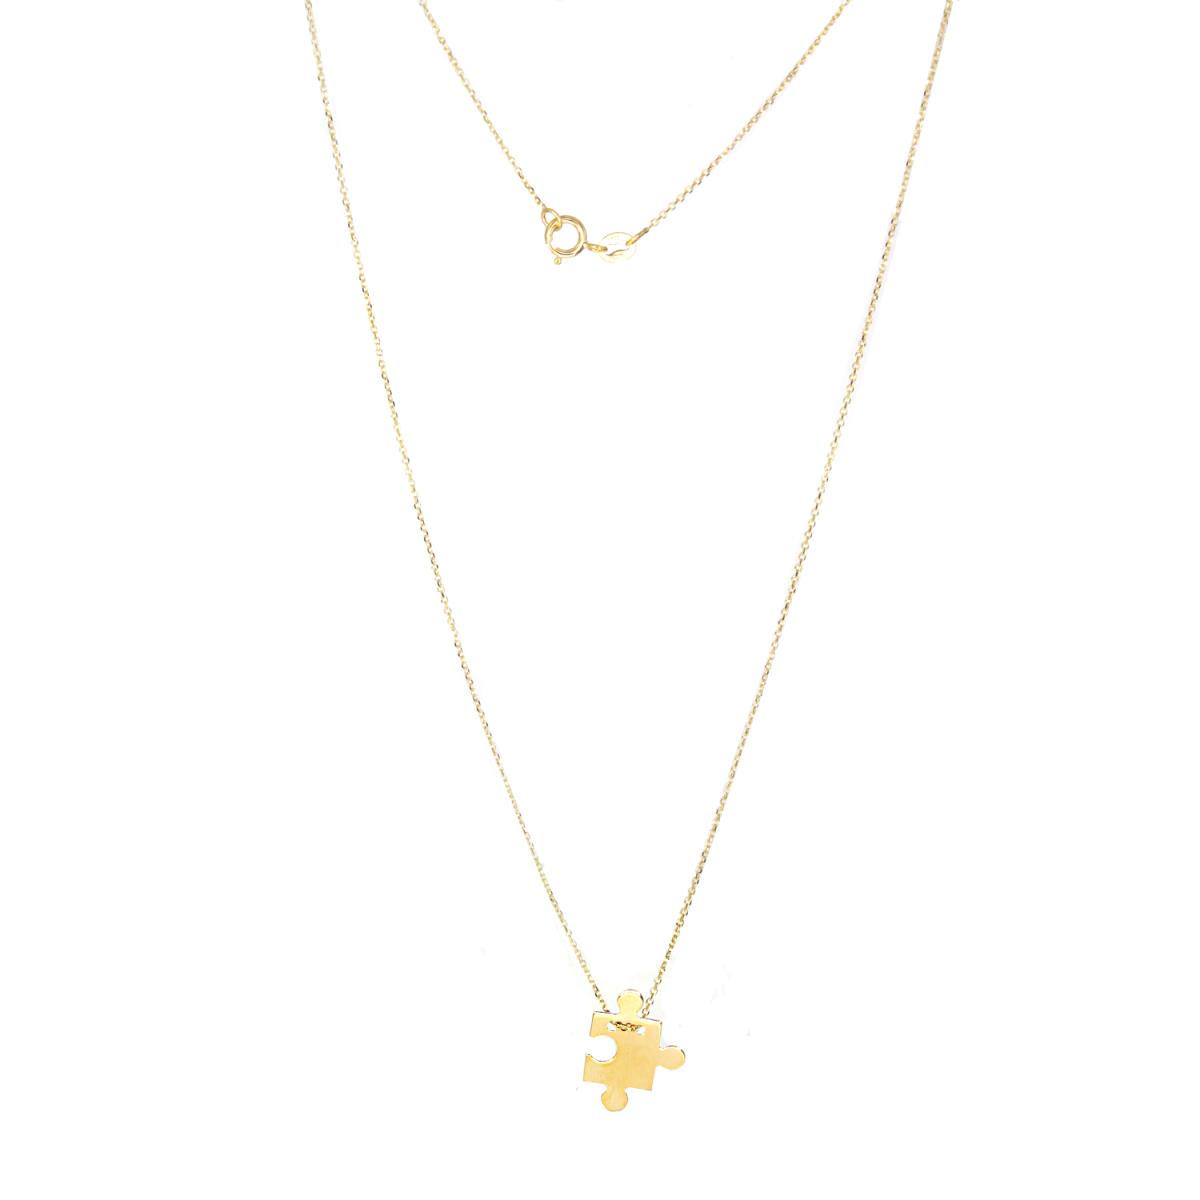 14K Yellow Gold Polished Puzzle Piece Charm 16" Necklace